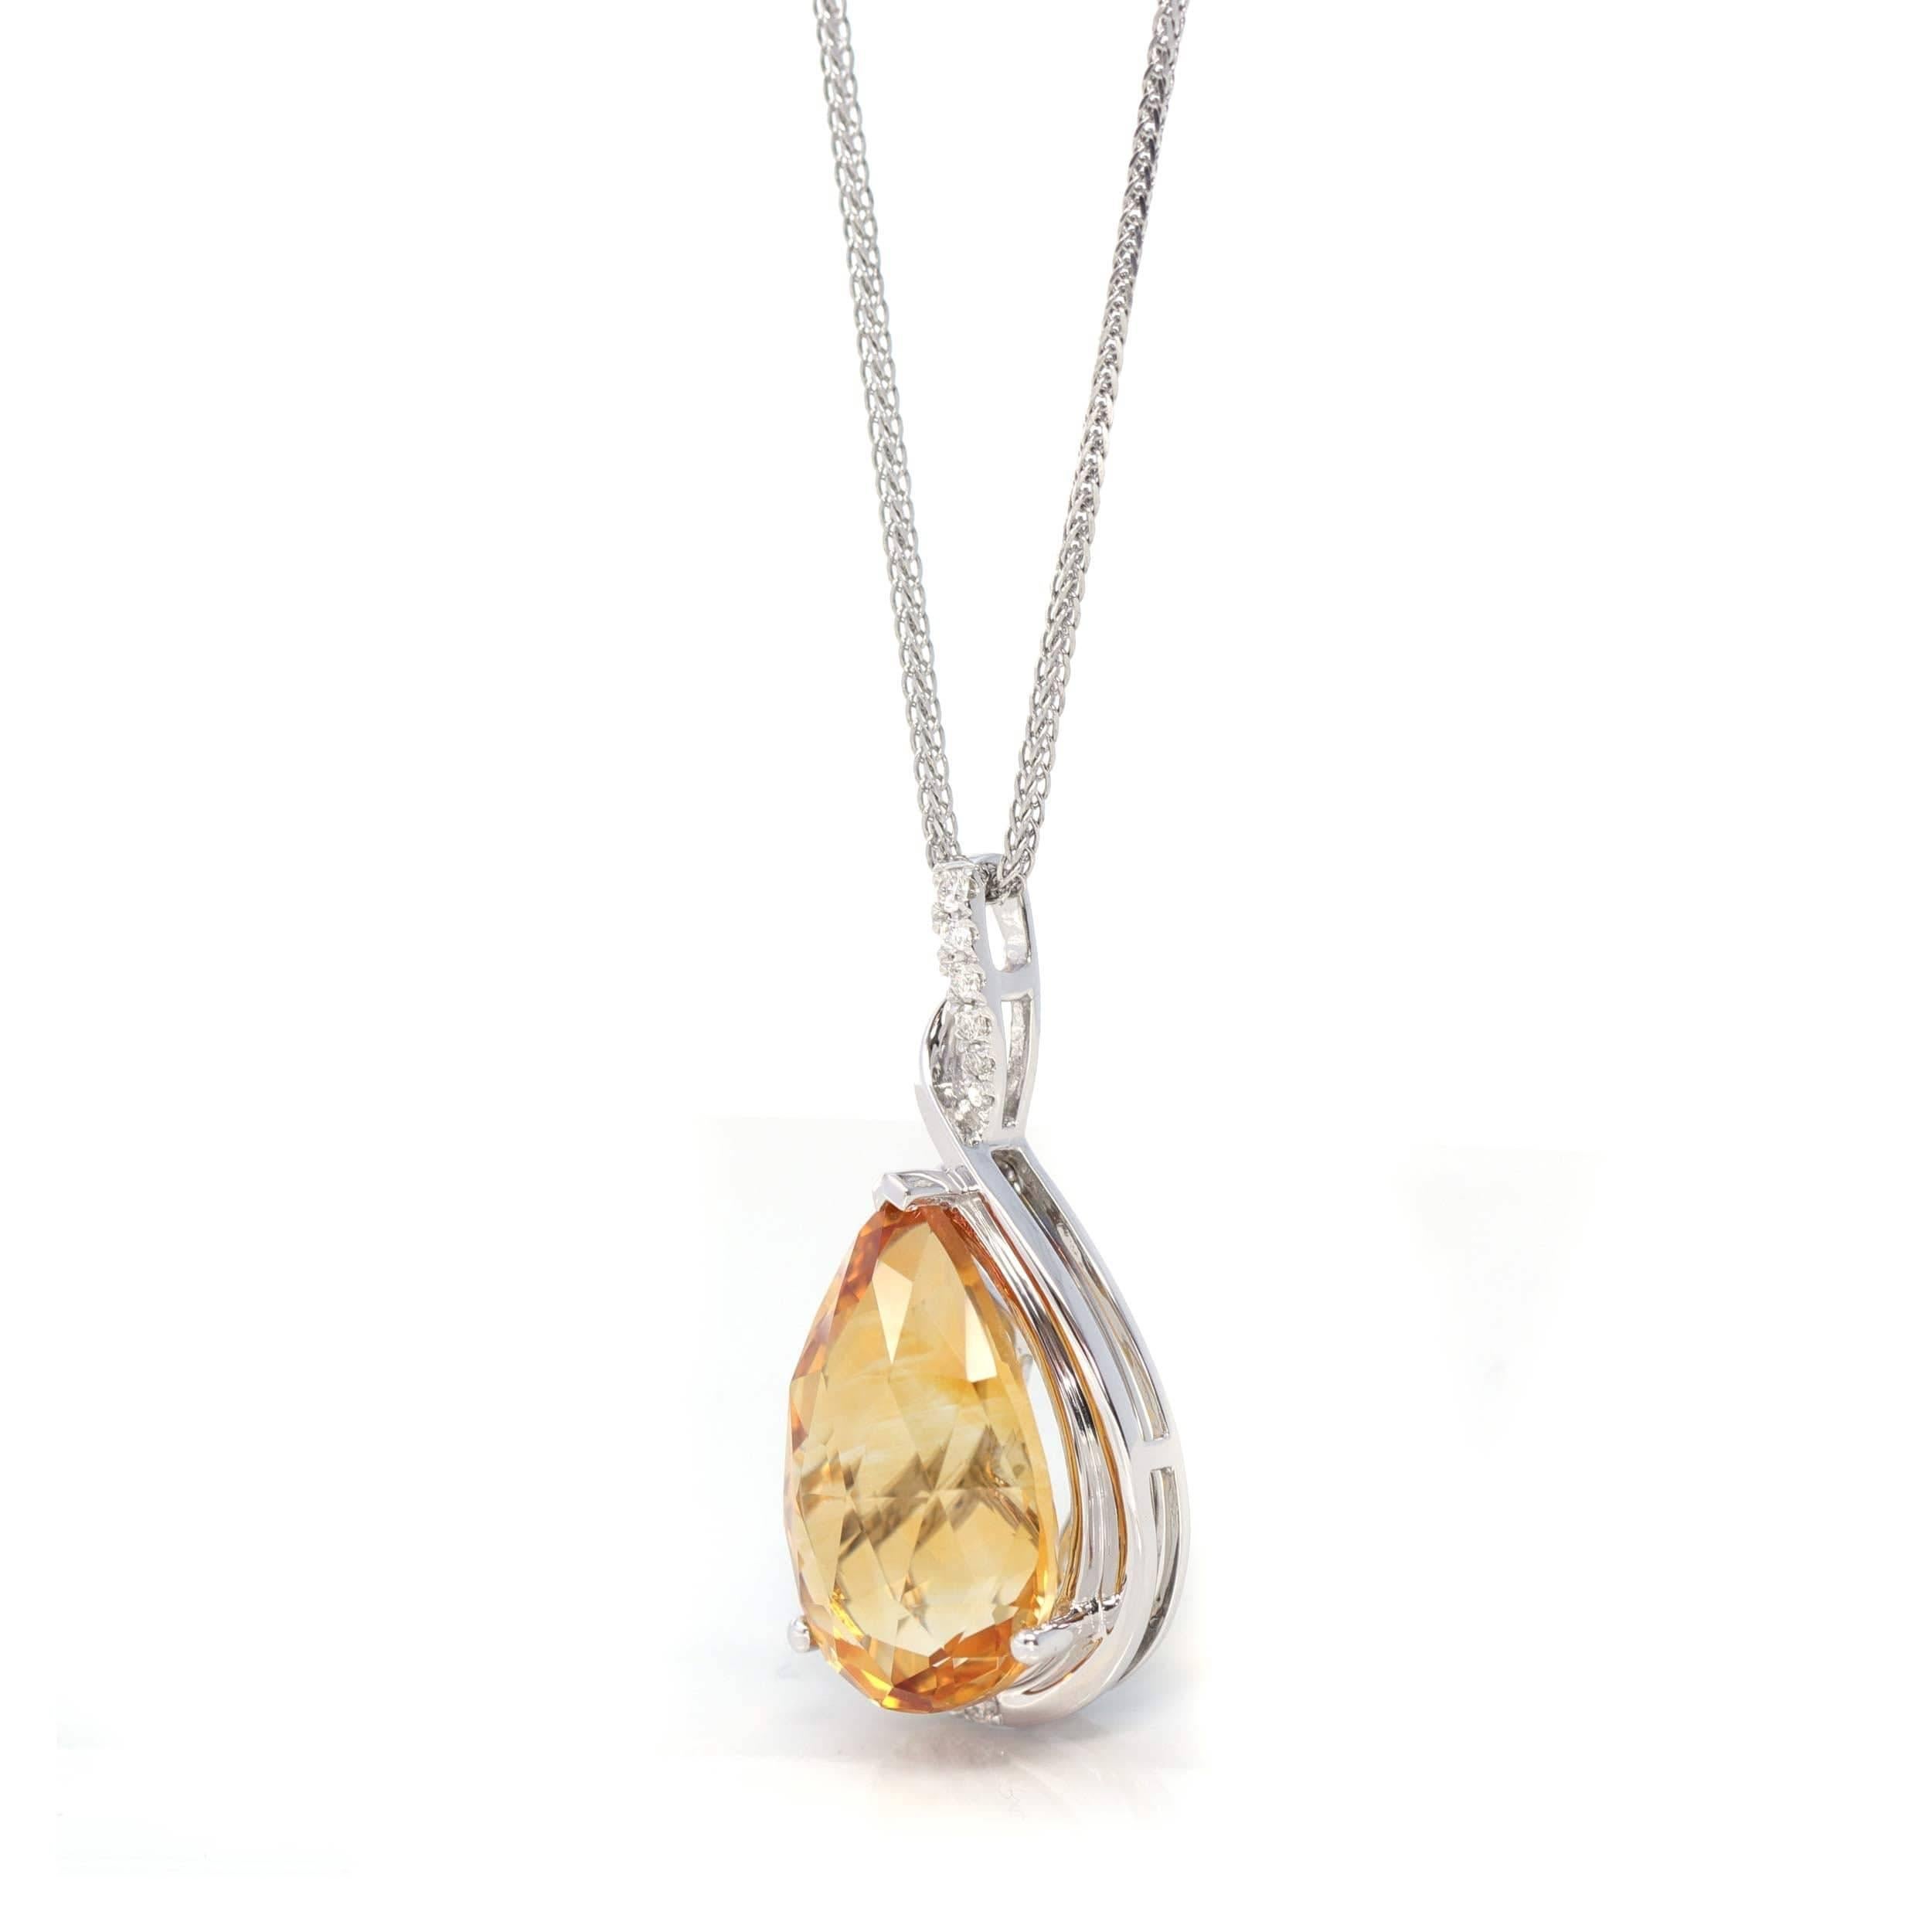 * CLASSIC DESIGN---- This pendant is made with high-quality genuine AA Tear Drop orange-yellow citrine. It looks so nice and shiny. The luxurious 13.25ct Citrine necklace is one-of-a-kind. The style is a classic teardrop and star bail set with